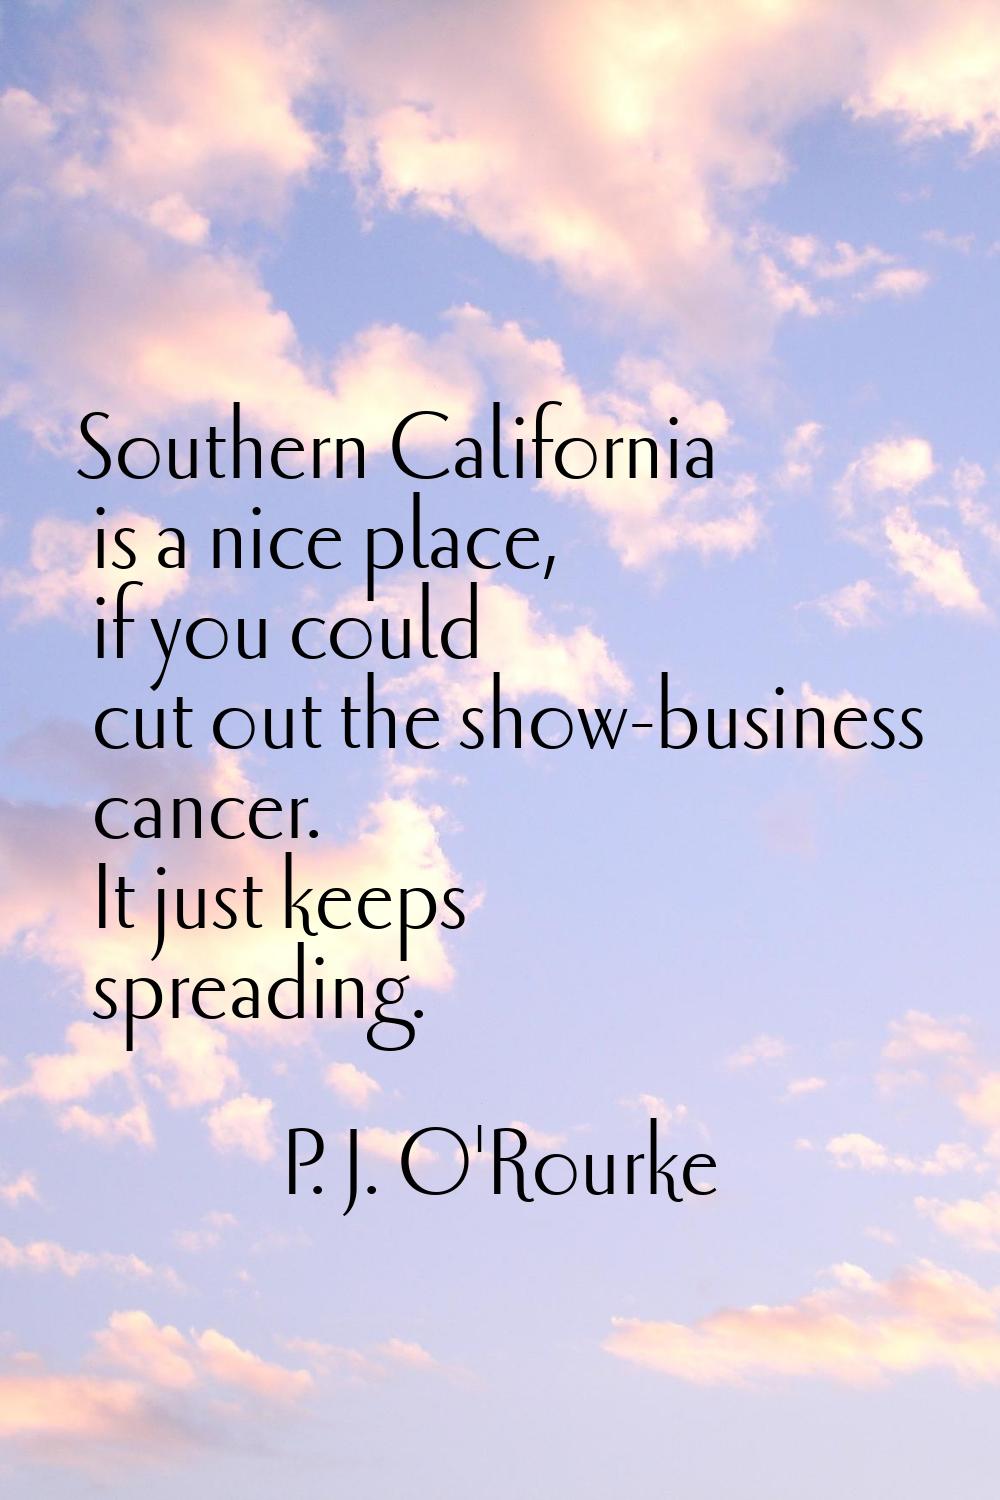 Southern California is a nice place, if you could cut out the show-business cancer. It just keeps s